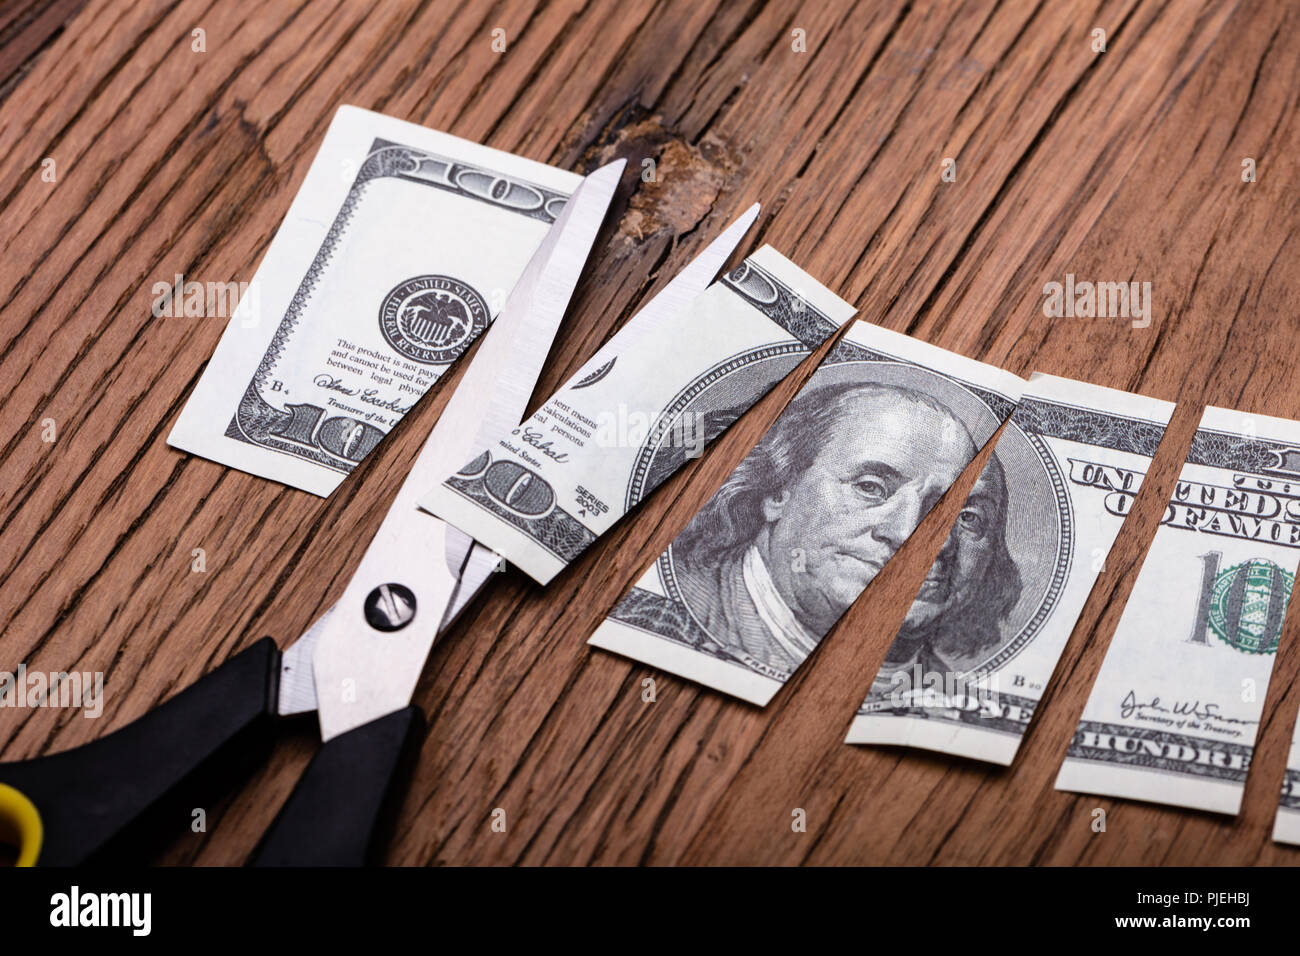 Cutted Dollar Banknote And Scissor On Wooden Table Stock Photo